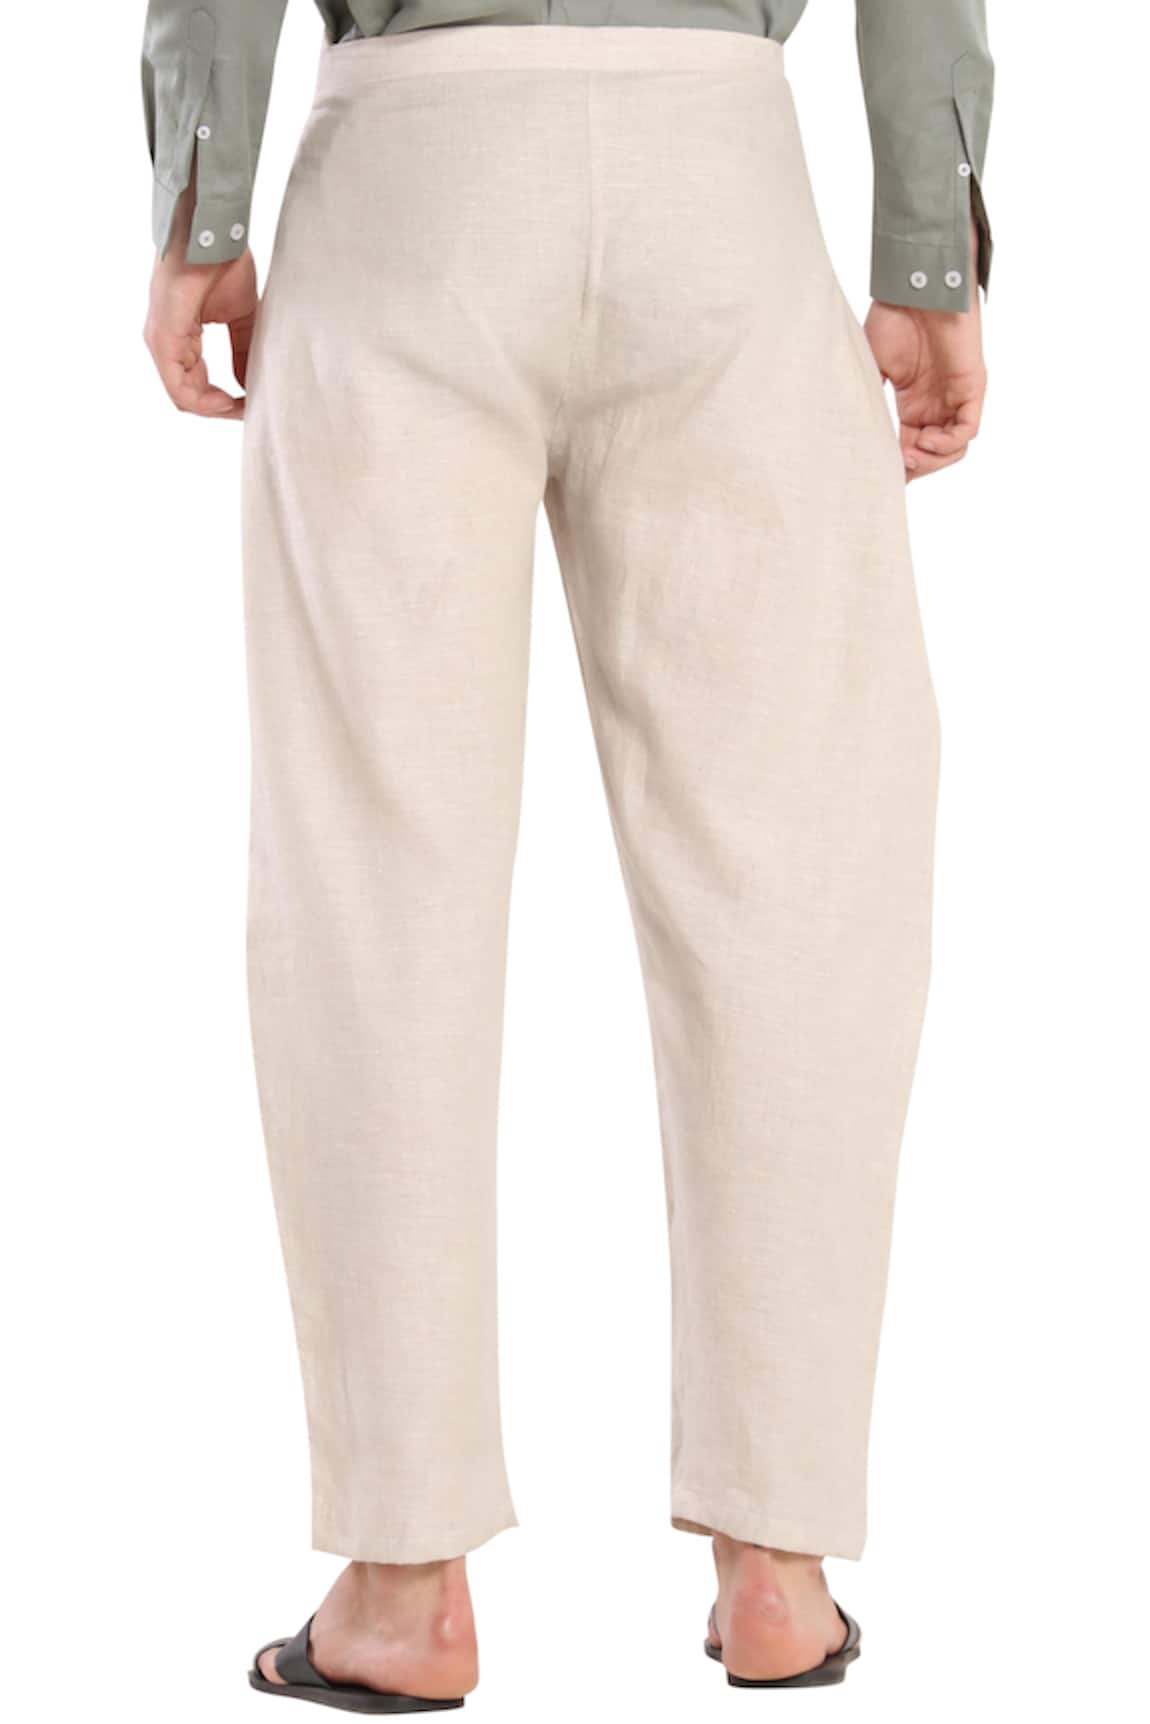 AUDATE Mens Pants Summer Beach Trousers Cotton India  Ubuy